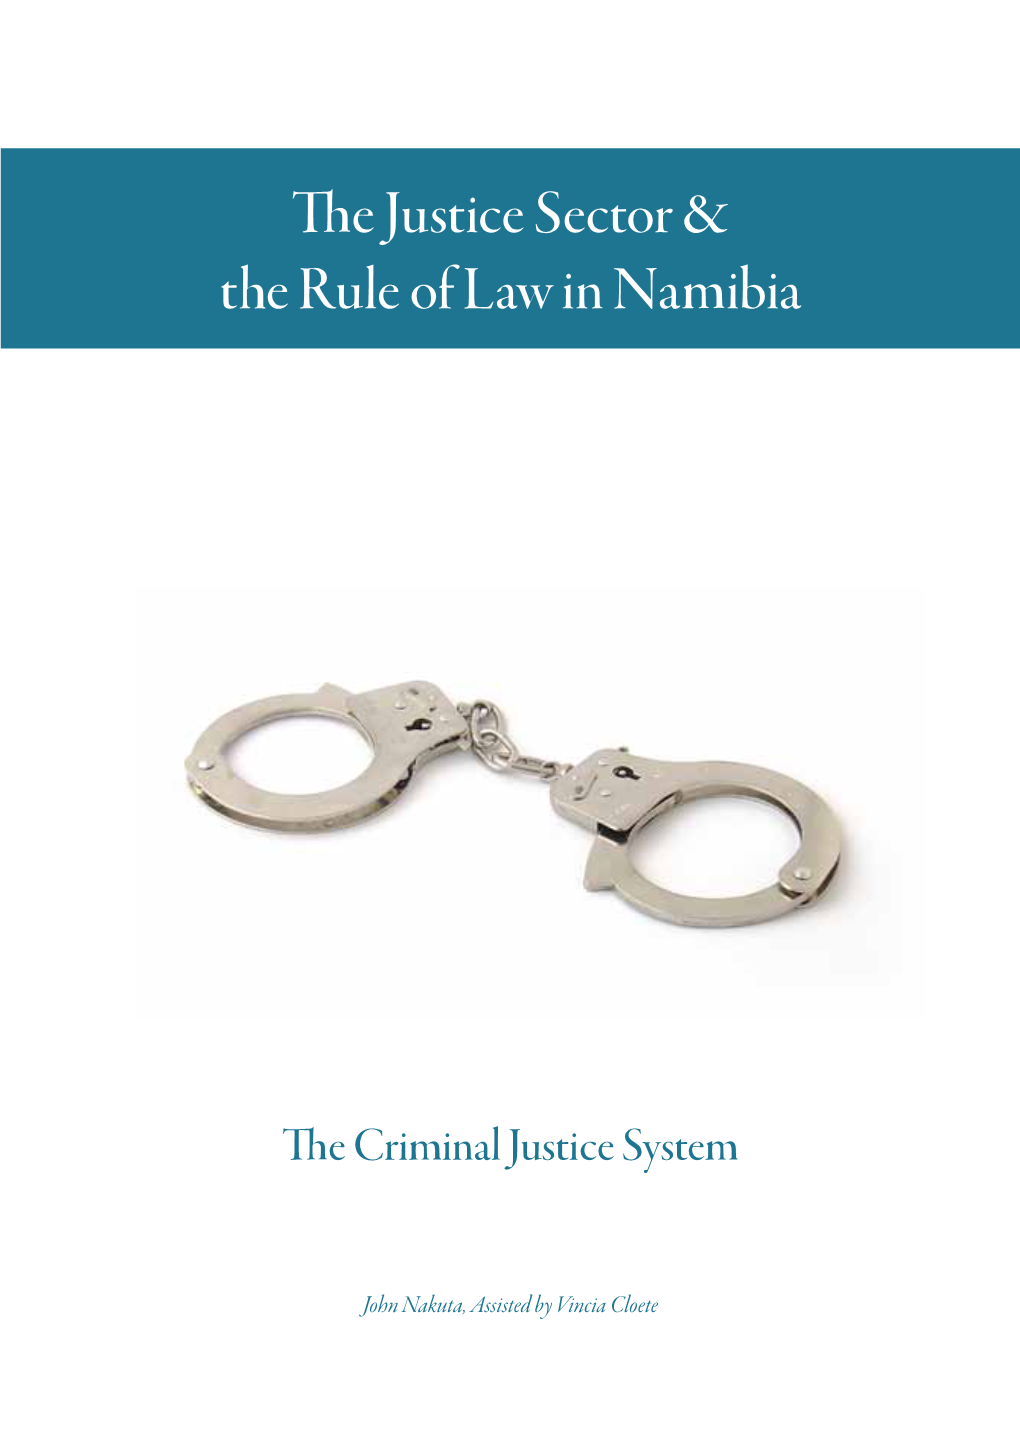 The Justice Sector & the Rule of Law in Namibia